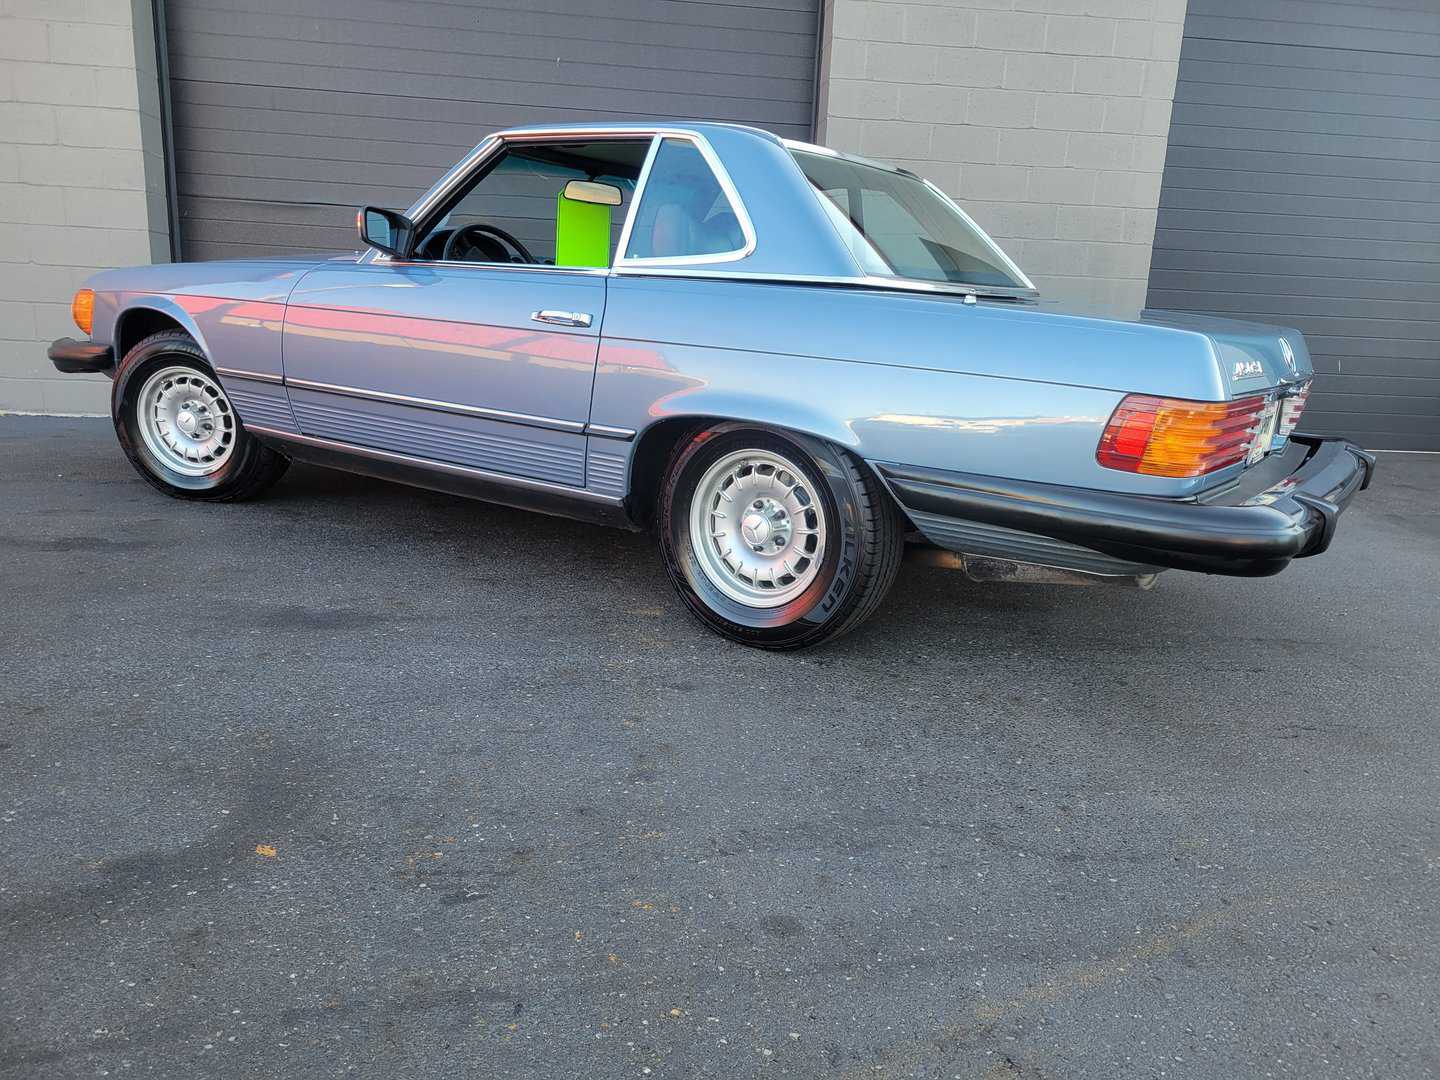 A Blue Mercedes Benz 450 Sl Is Parked In Front Of A Garage.